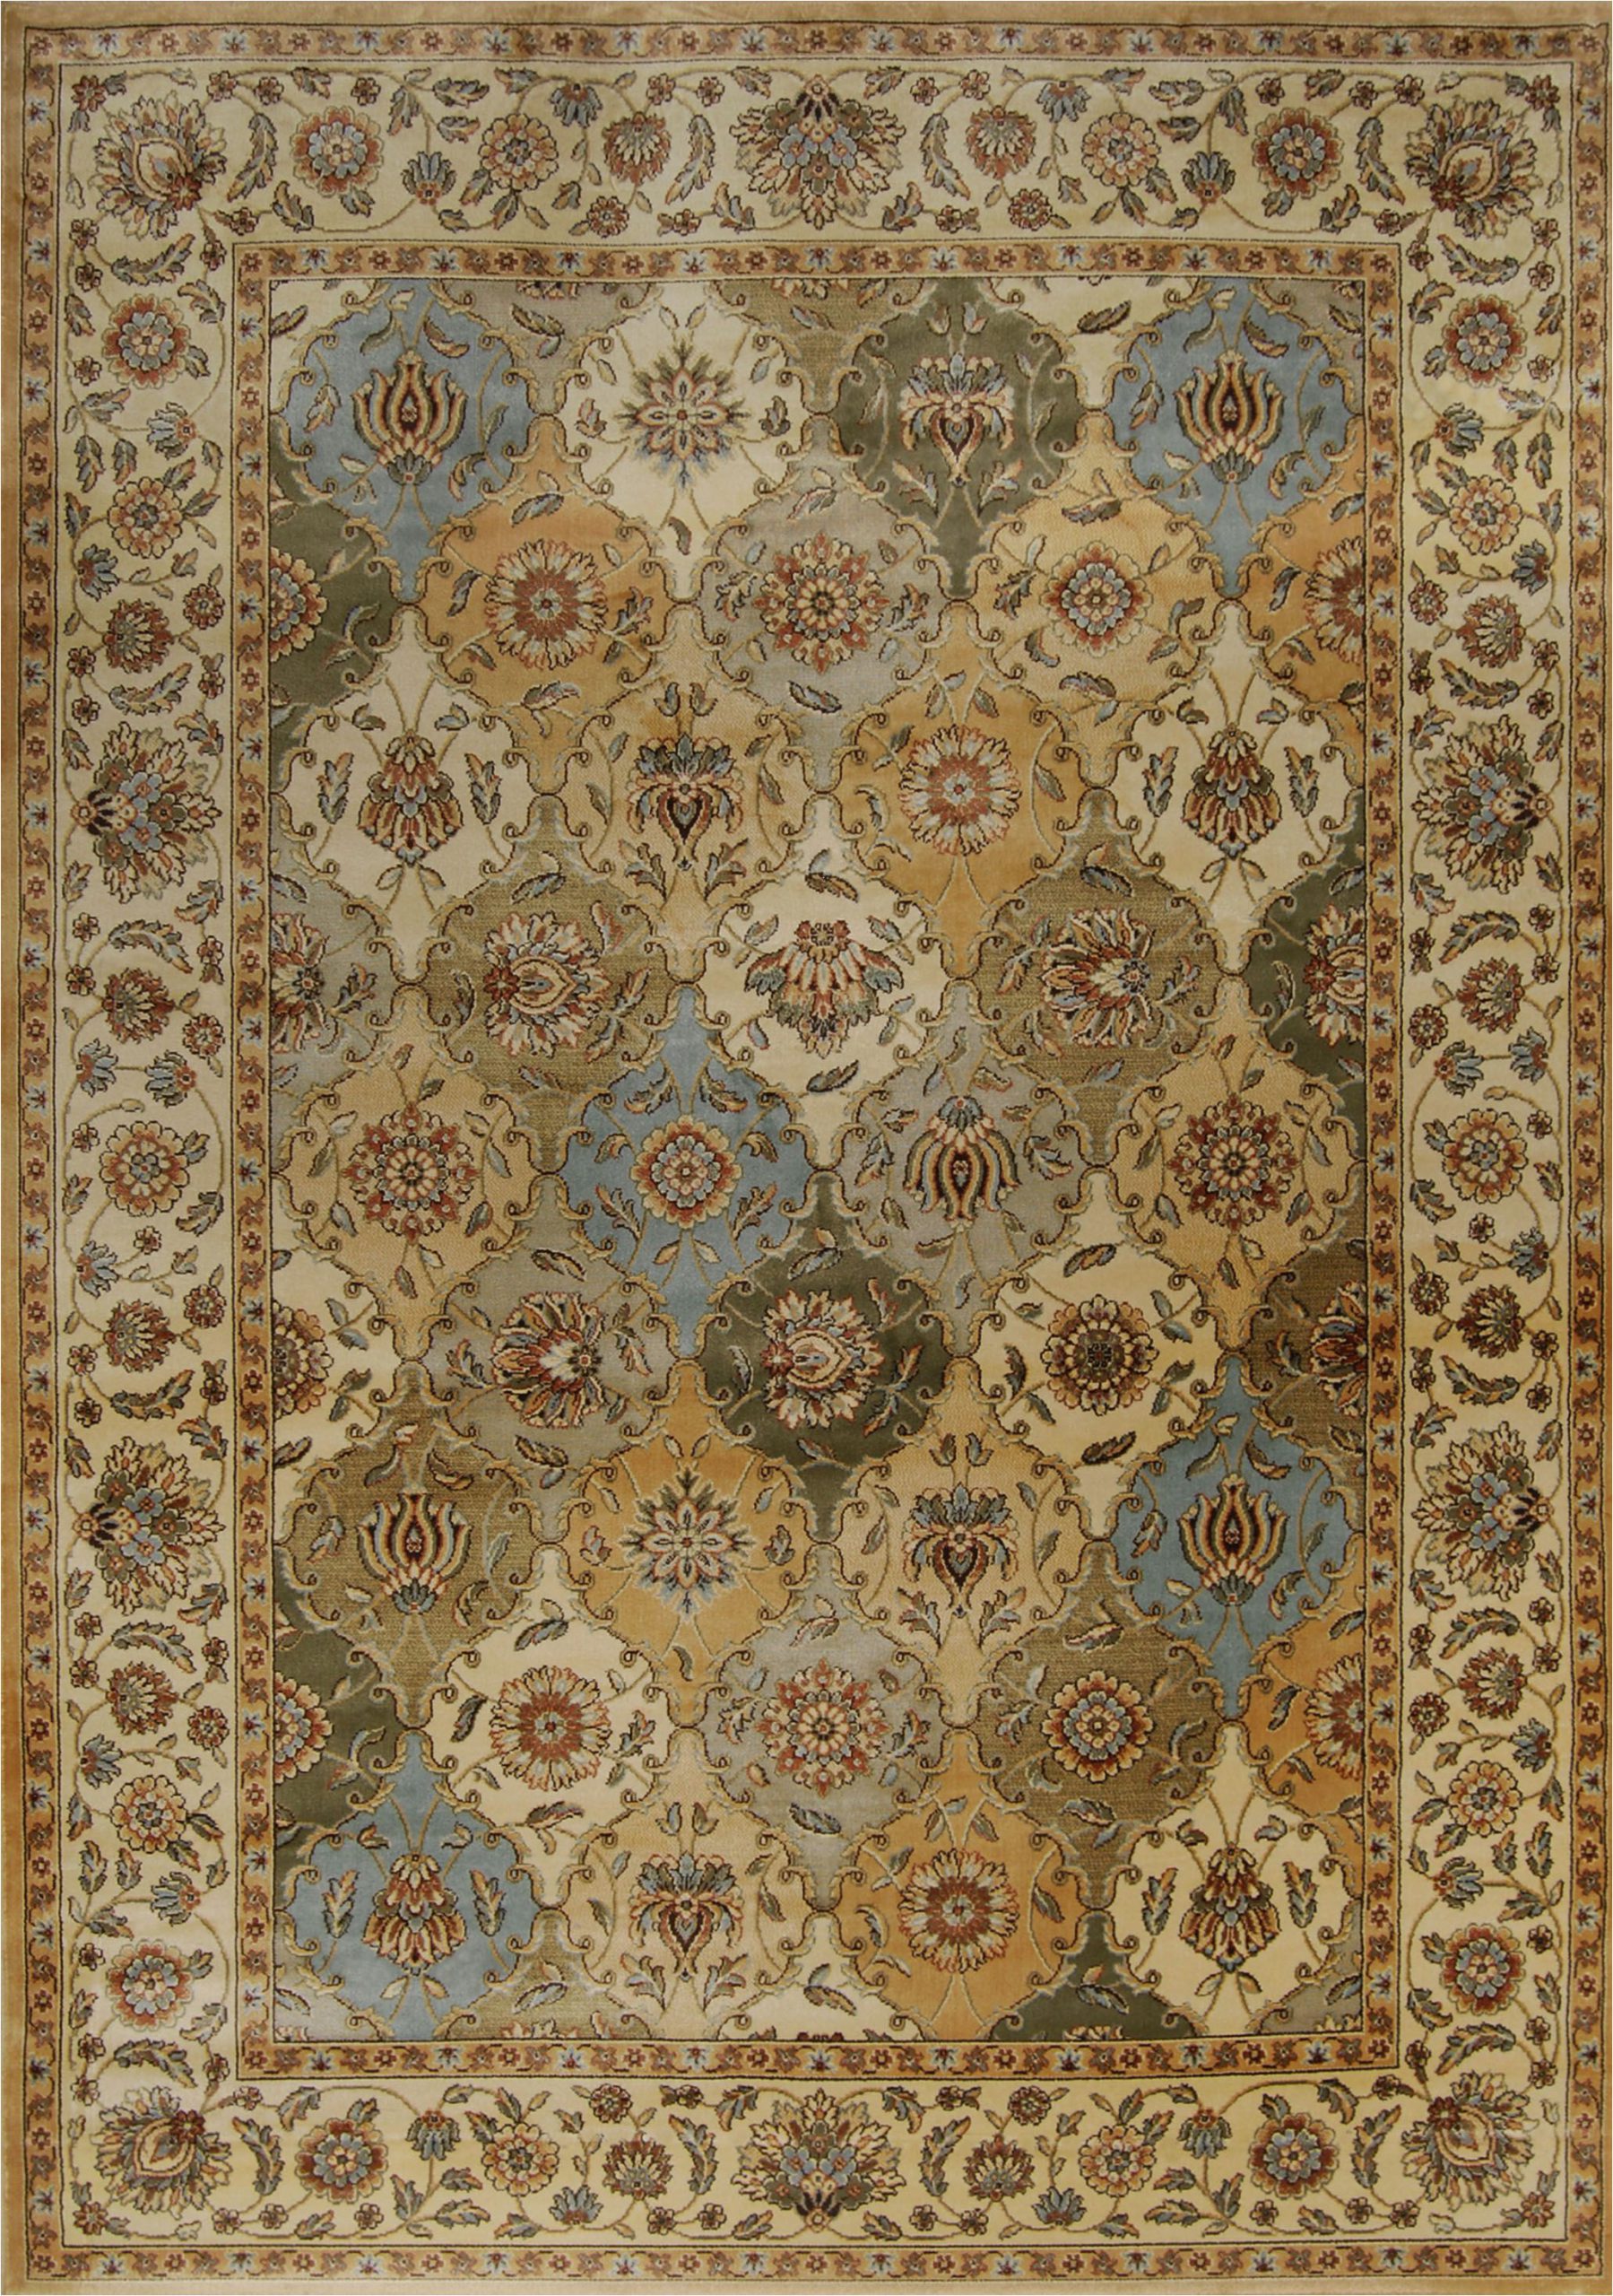 Discount area Rugs 8 X 10 8×10 area Rugs Cheap Rugs Sale